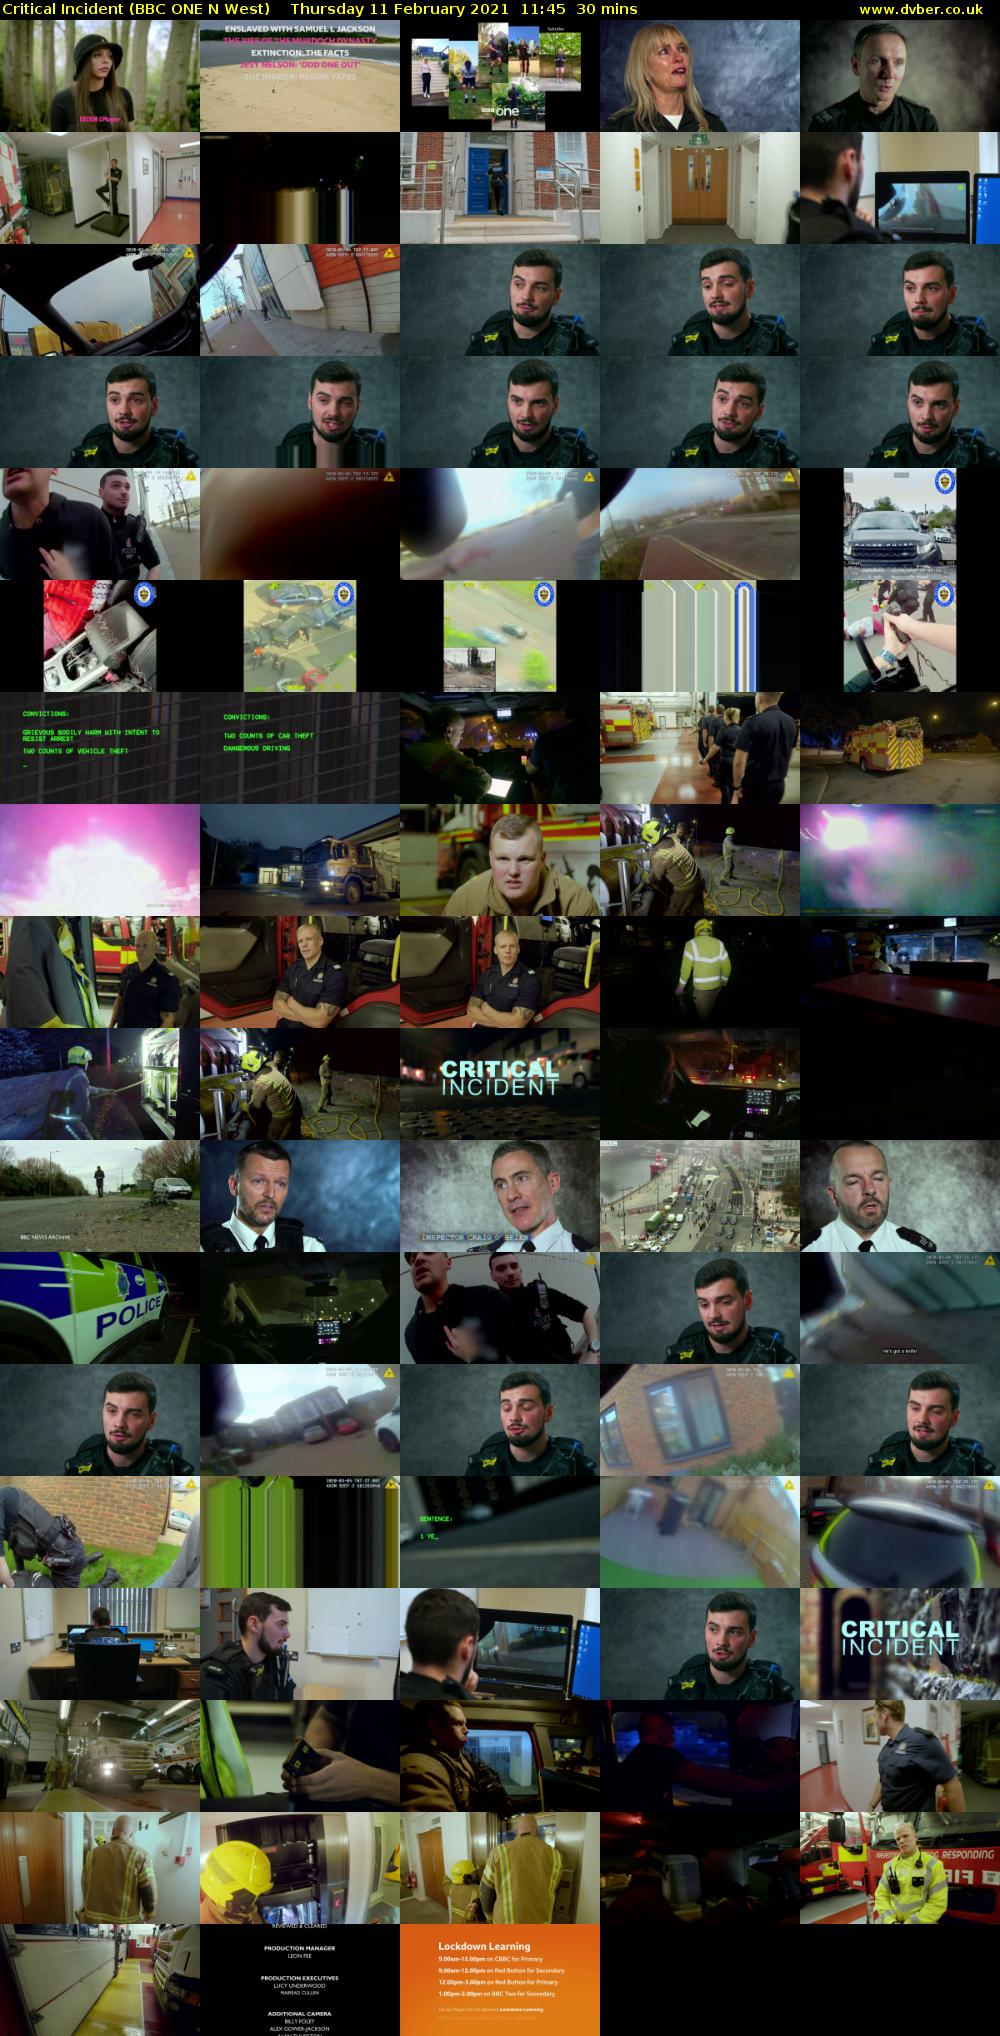 Critical Incident (BBC ONE N West) Thursday 11 February 2021 11:45 - 12:15